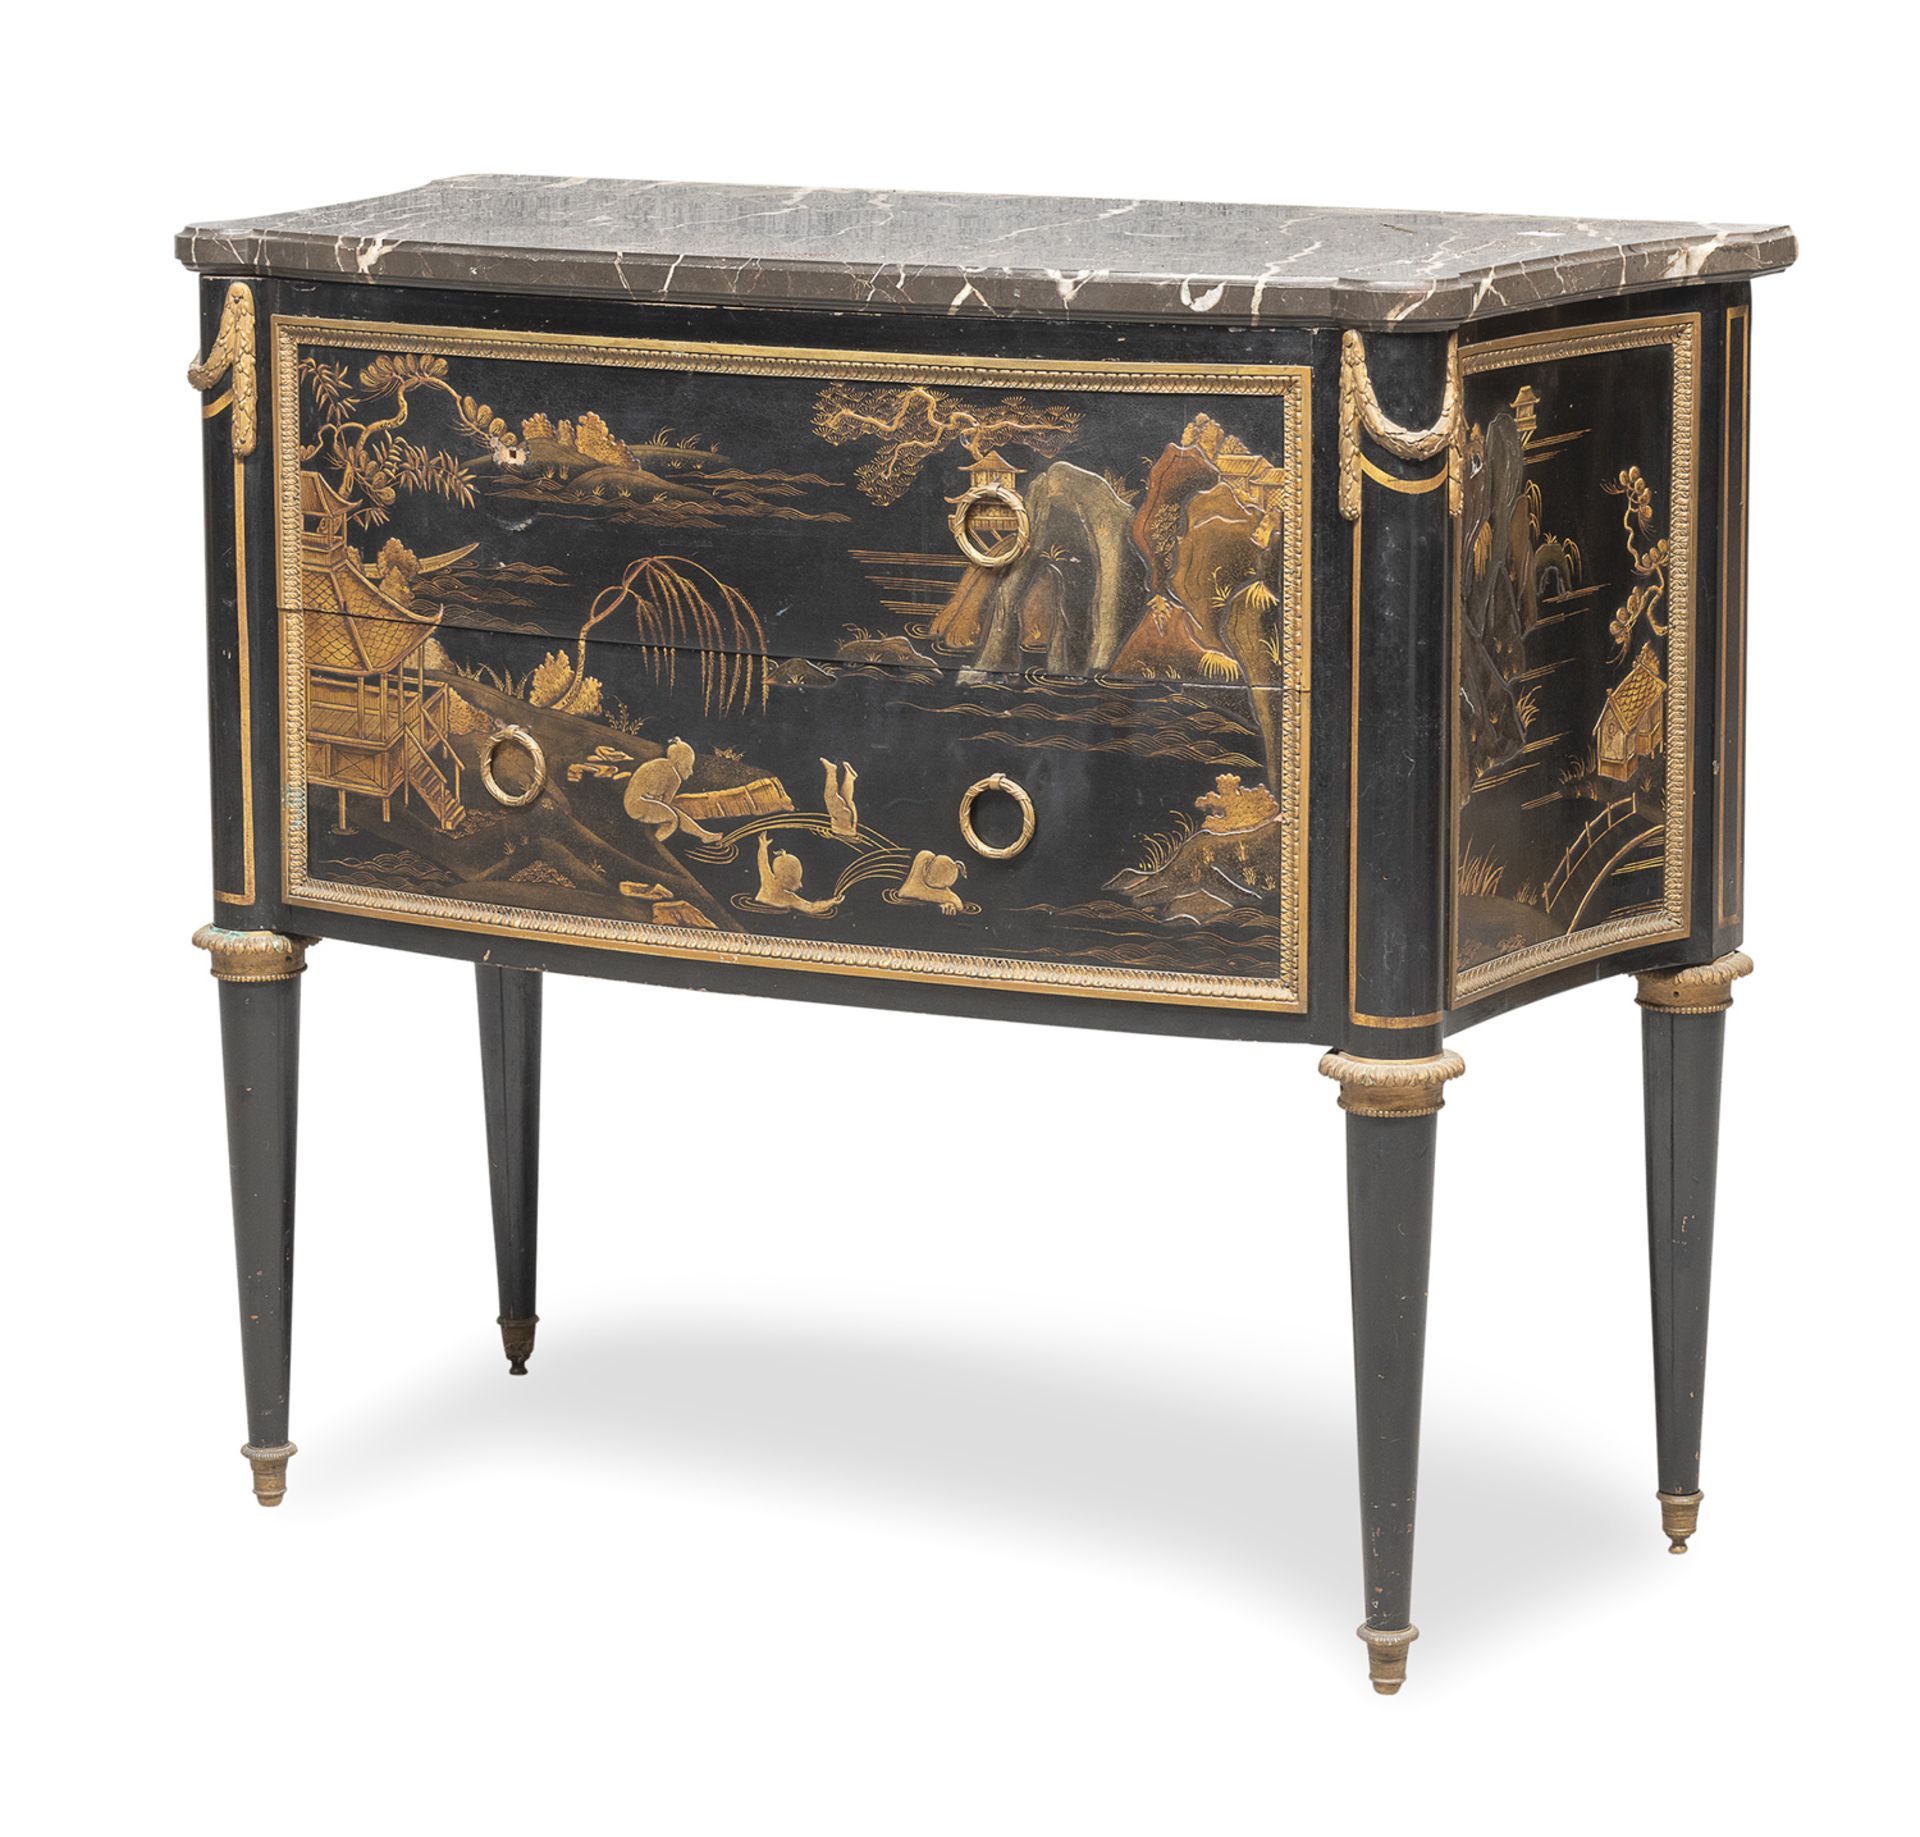 CHINOISERIE COMMODE FRENCH STYLE 20TH CENTURY